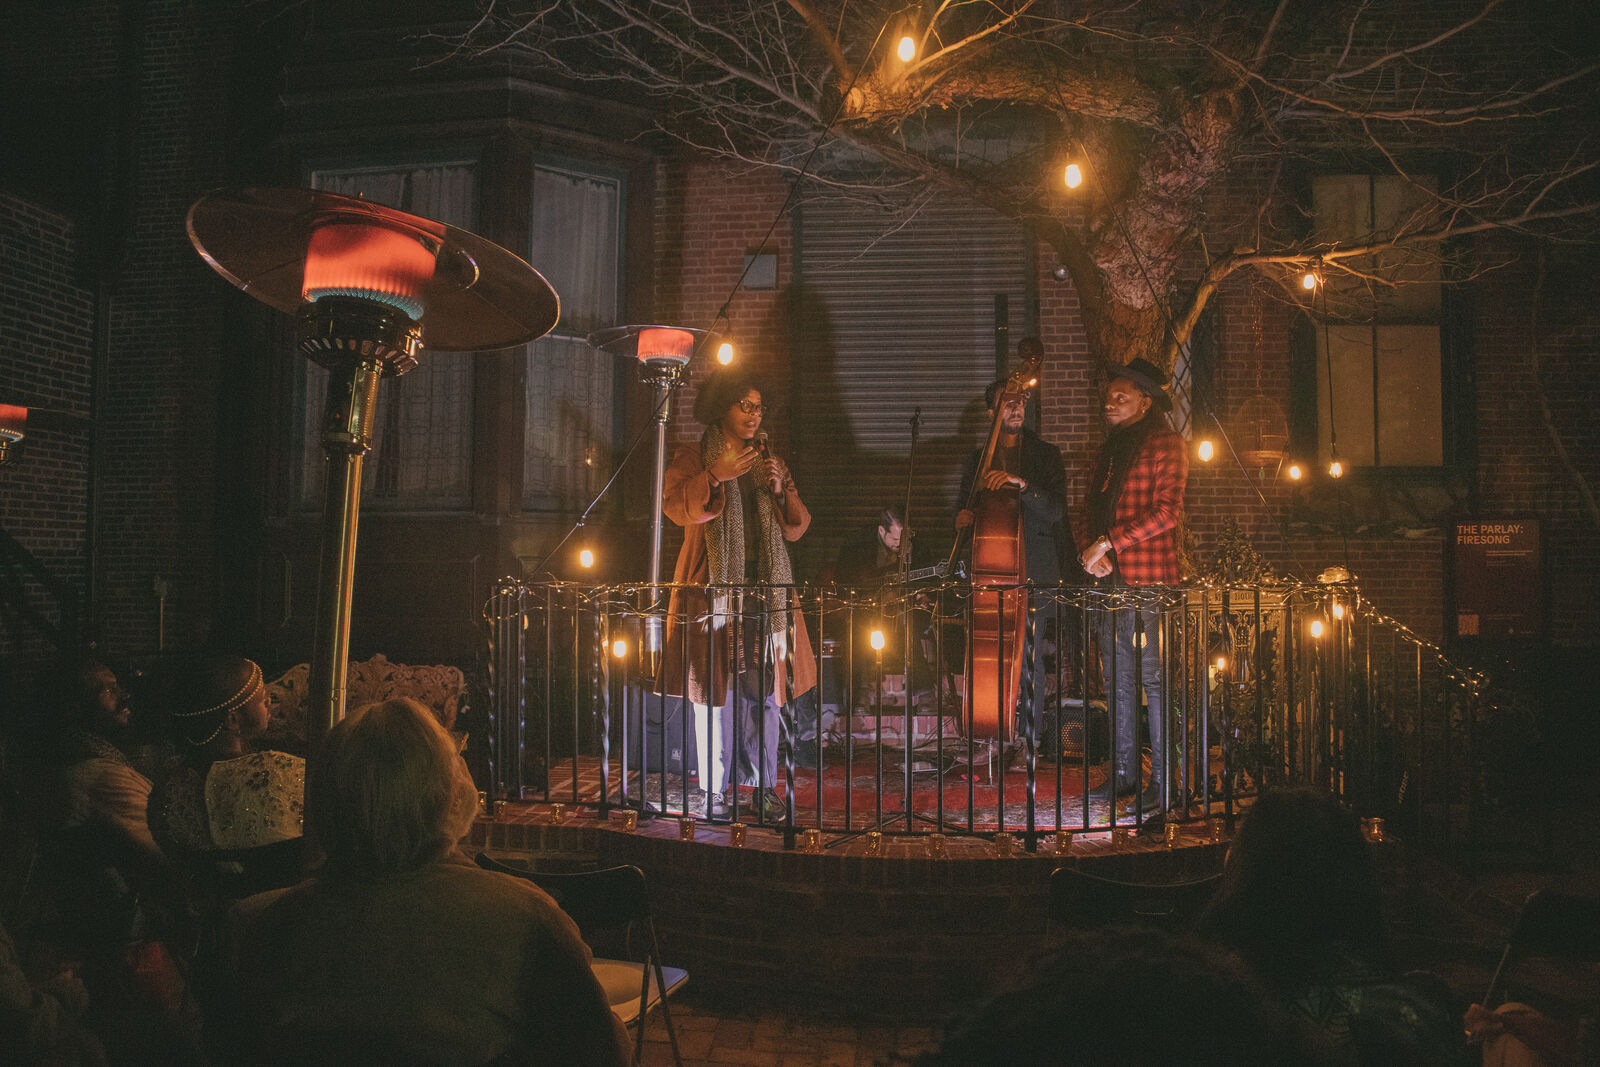 A group of three performers stand on an elevated platform, surrounded by warm fairy lights. In the foreground a crowd watches on. One performer is holding an upright bass, while flanked by two others holding microphones.